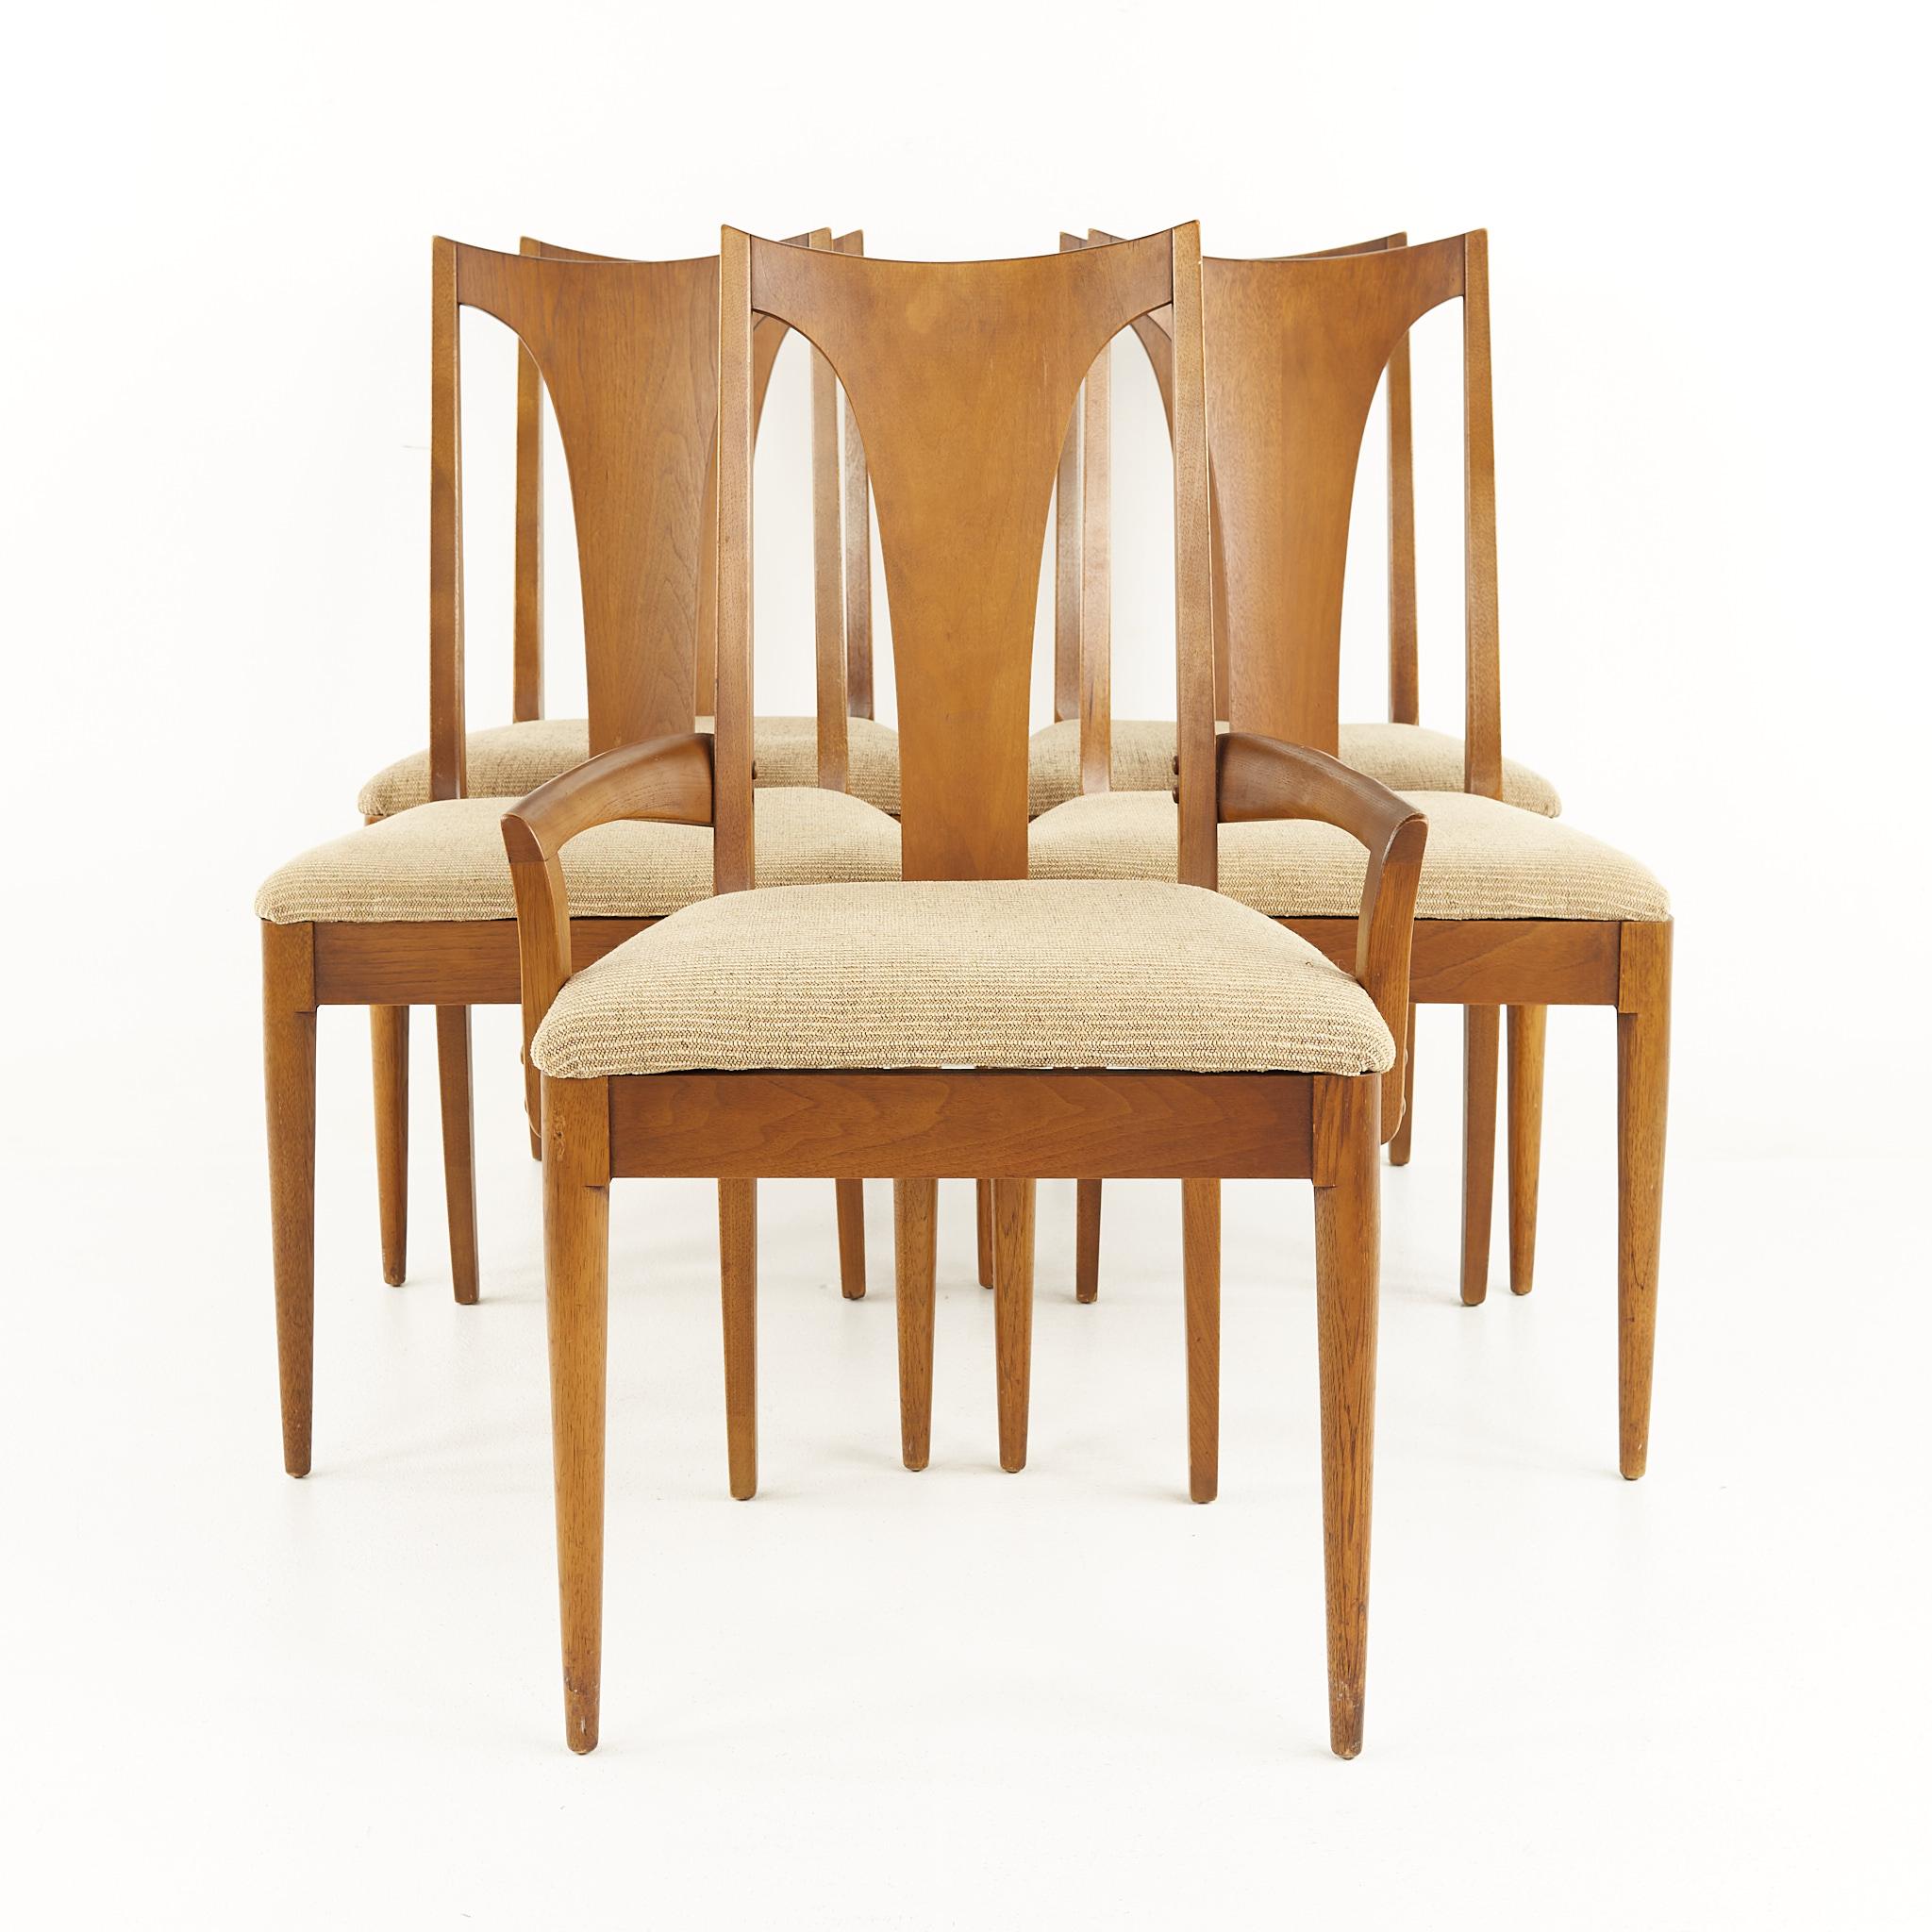 Broyhill Basilia II mid century dining chairs - Set of 5

Each chair measures: 22.5 wide x 23 deep x 37 inches high, with a seat height of 18.5 and arm height of 23 inches

All pieces of furniture can be had in what we call restored vintage